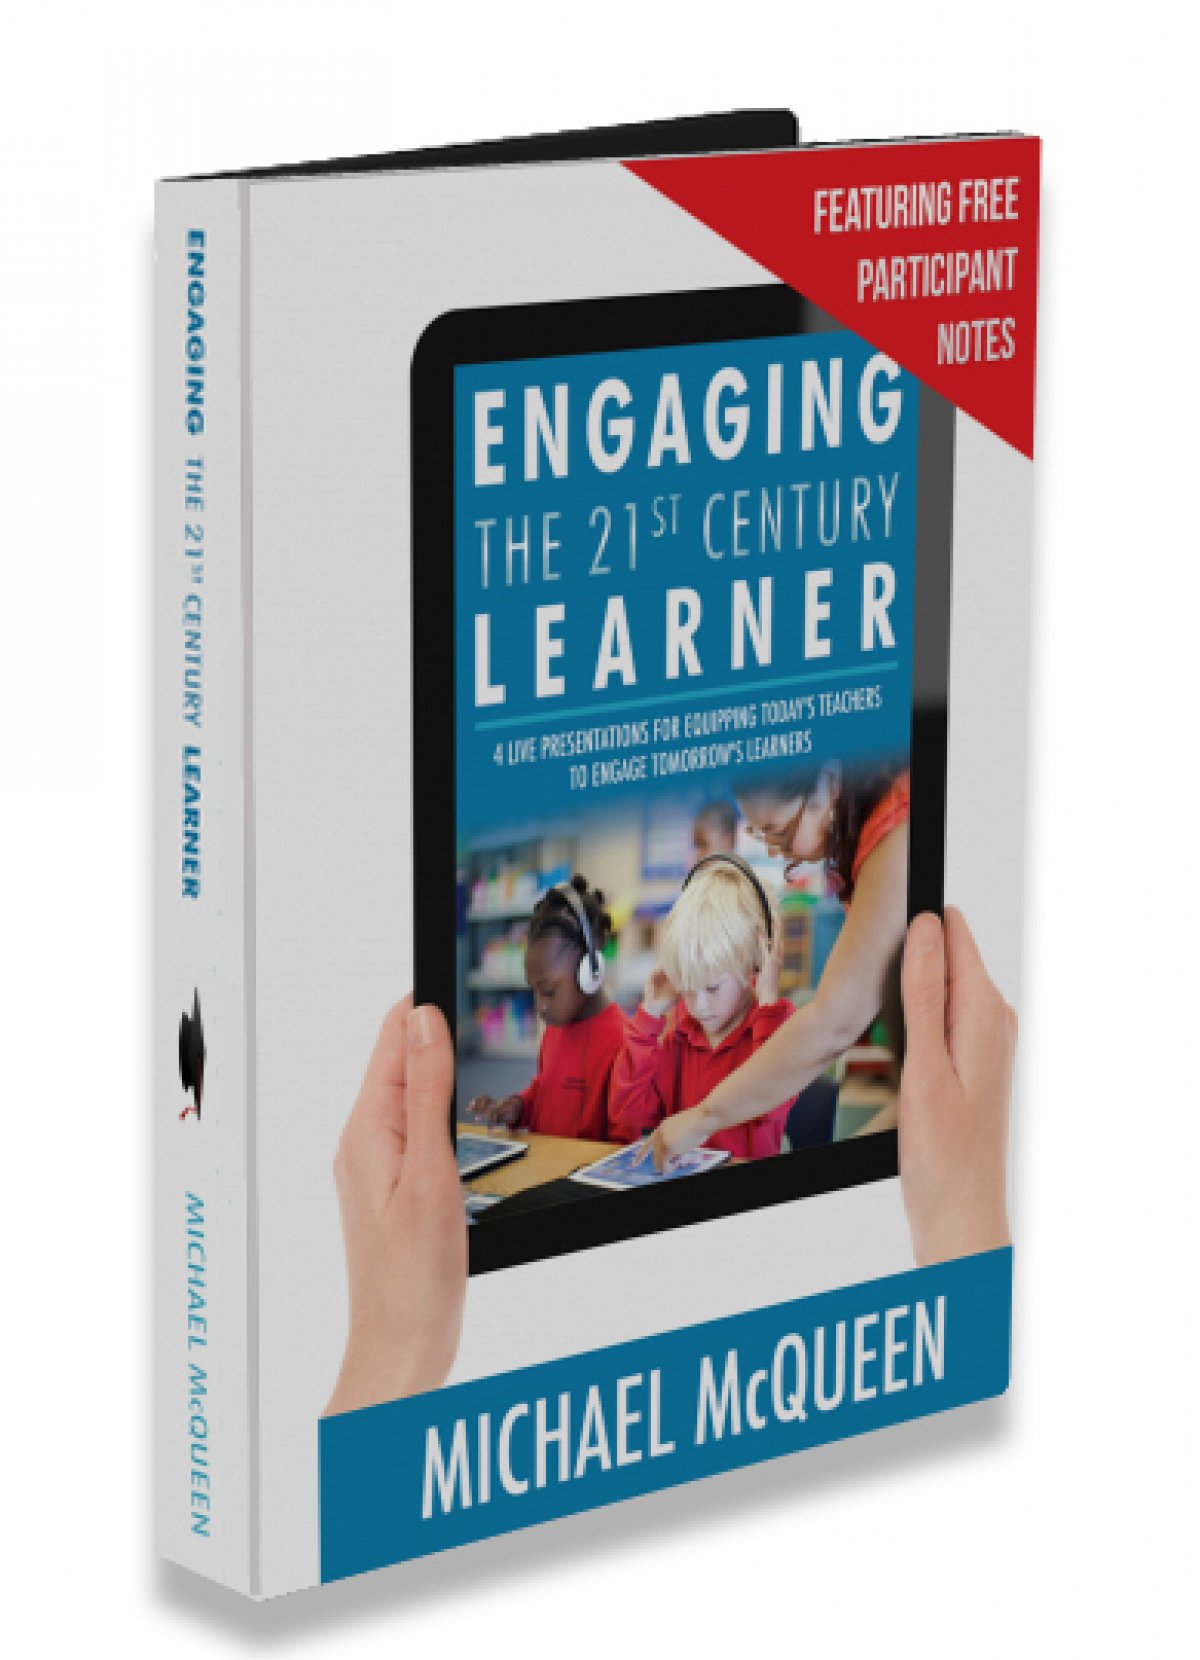 Engaging the 21st Century Learner - DVD